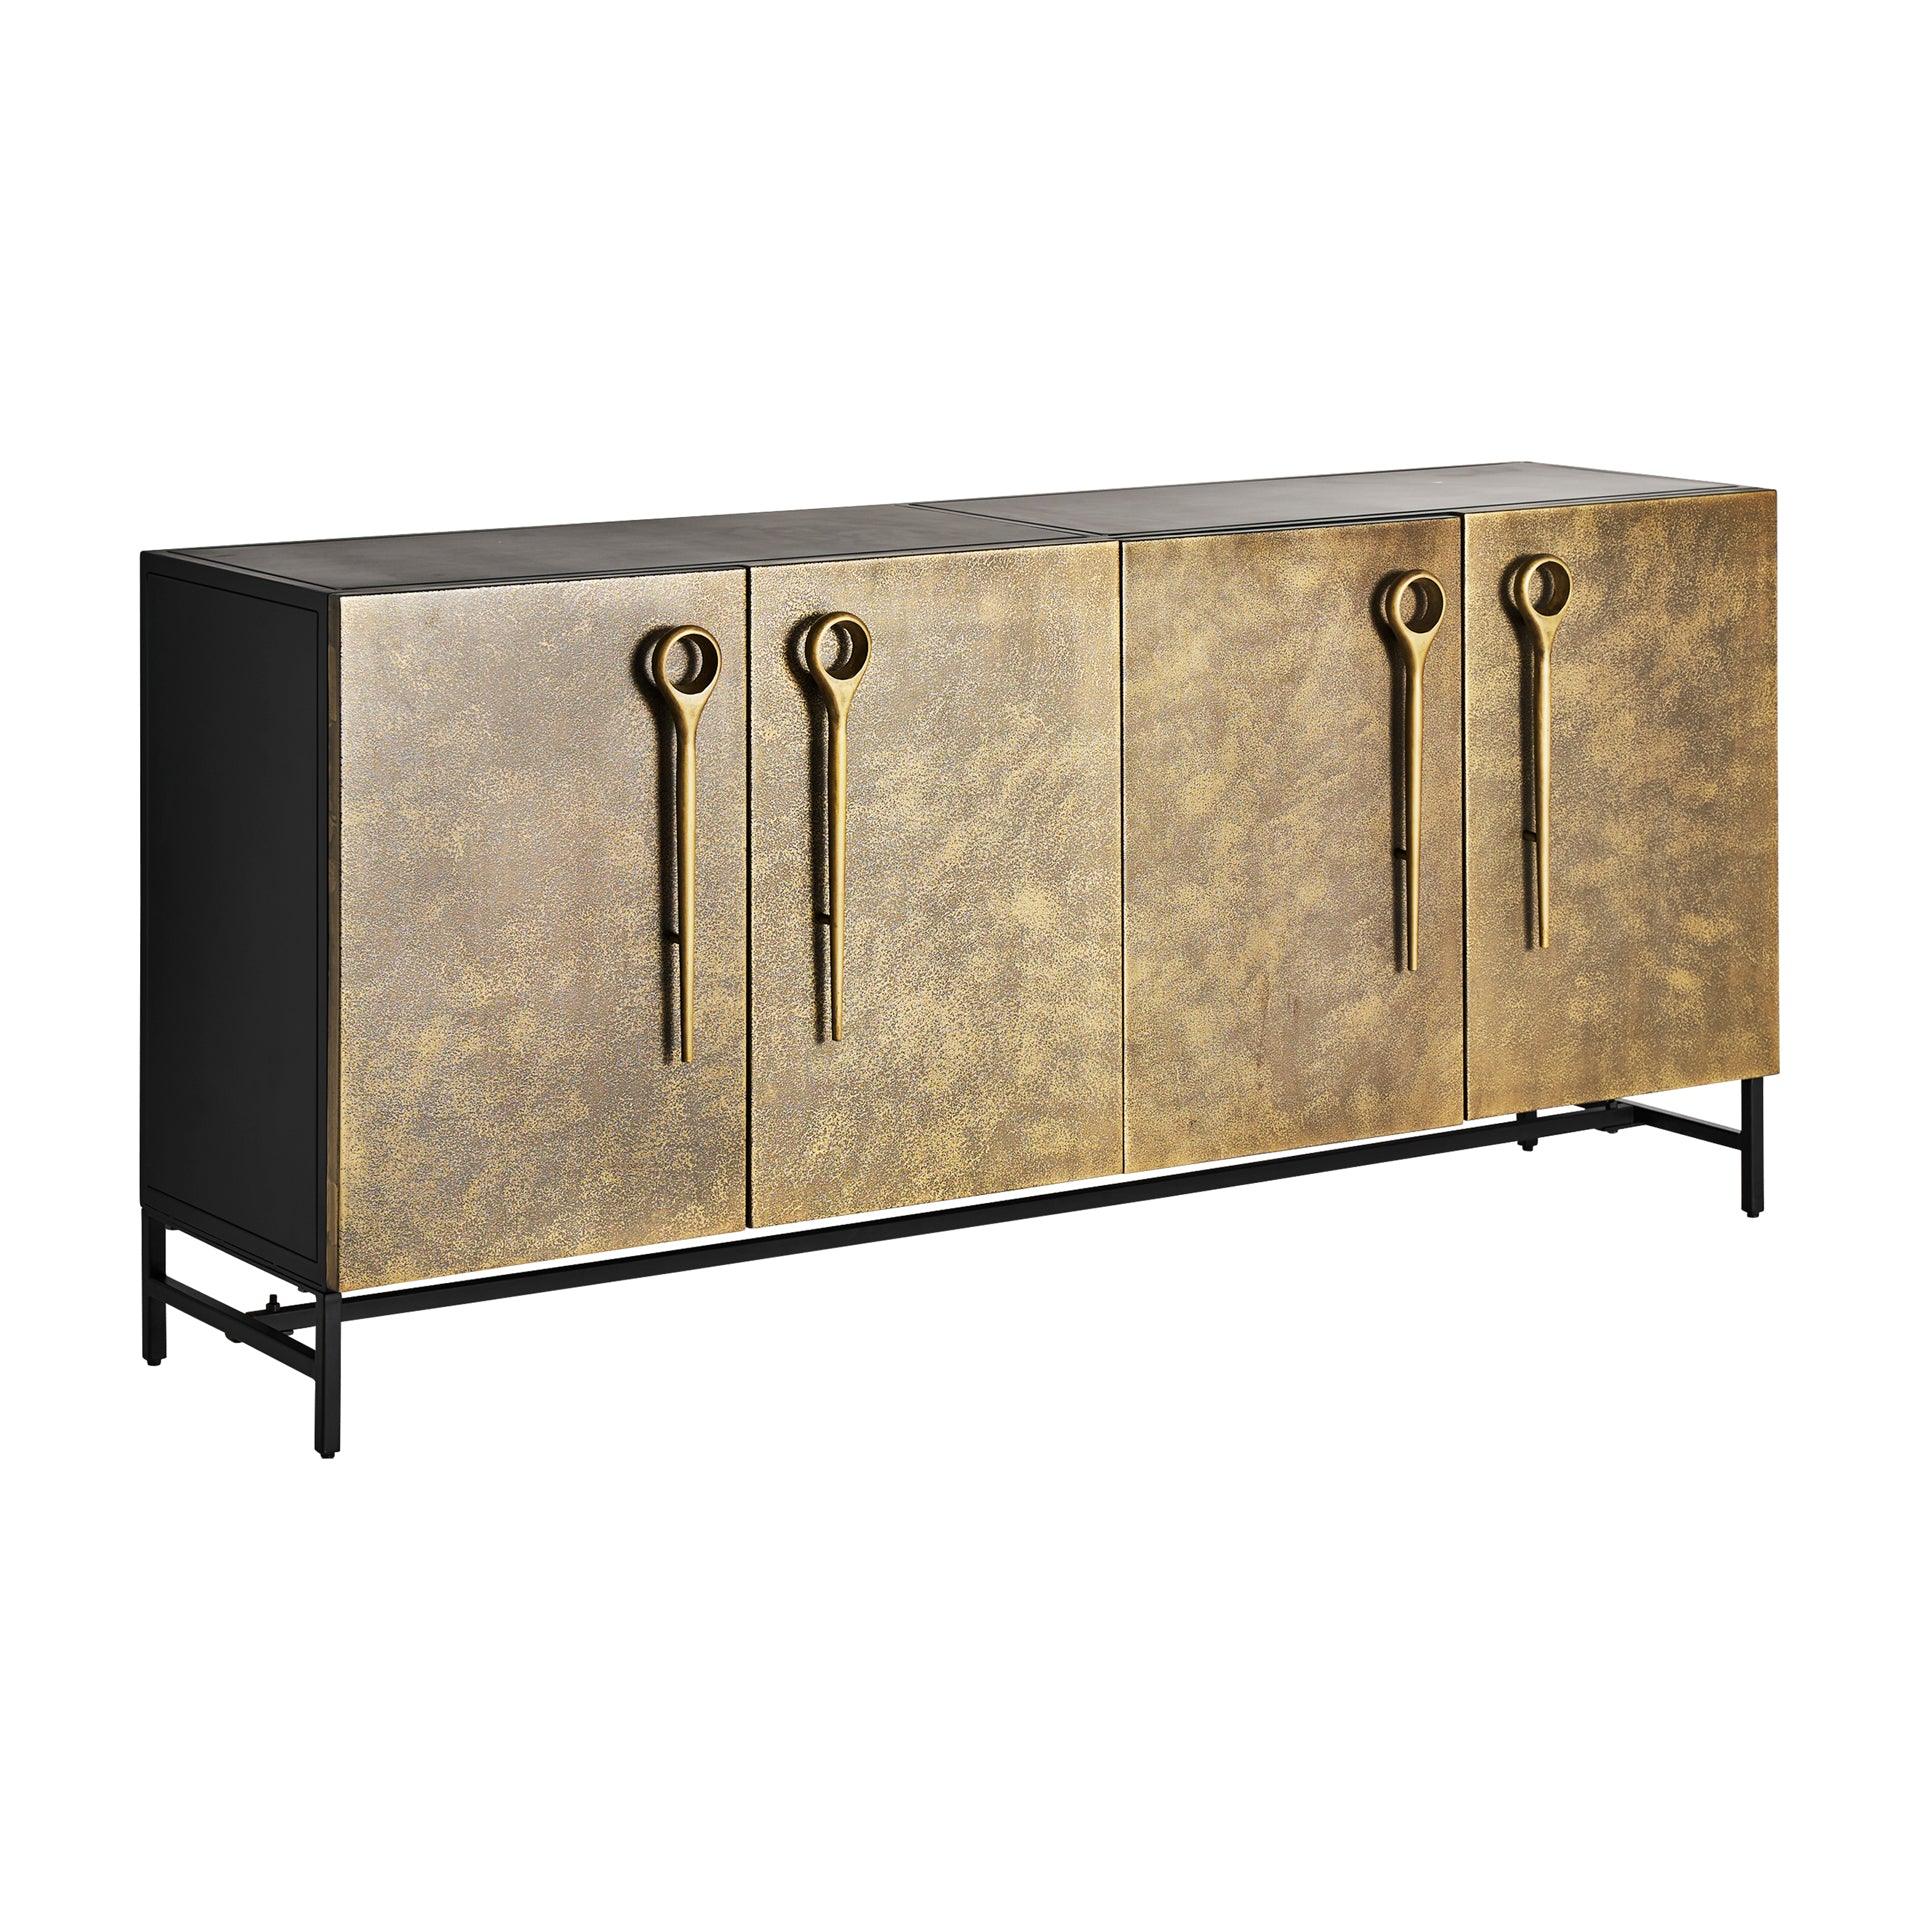 Bouloire Gold Iron Sideboard - Maison Rêves UK